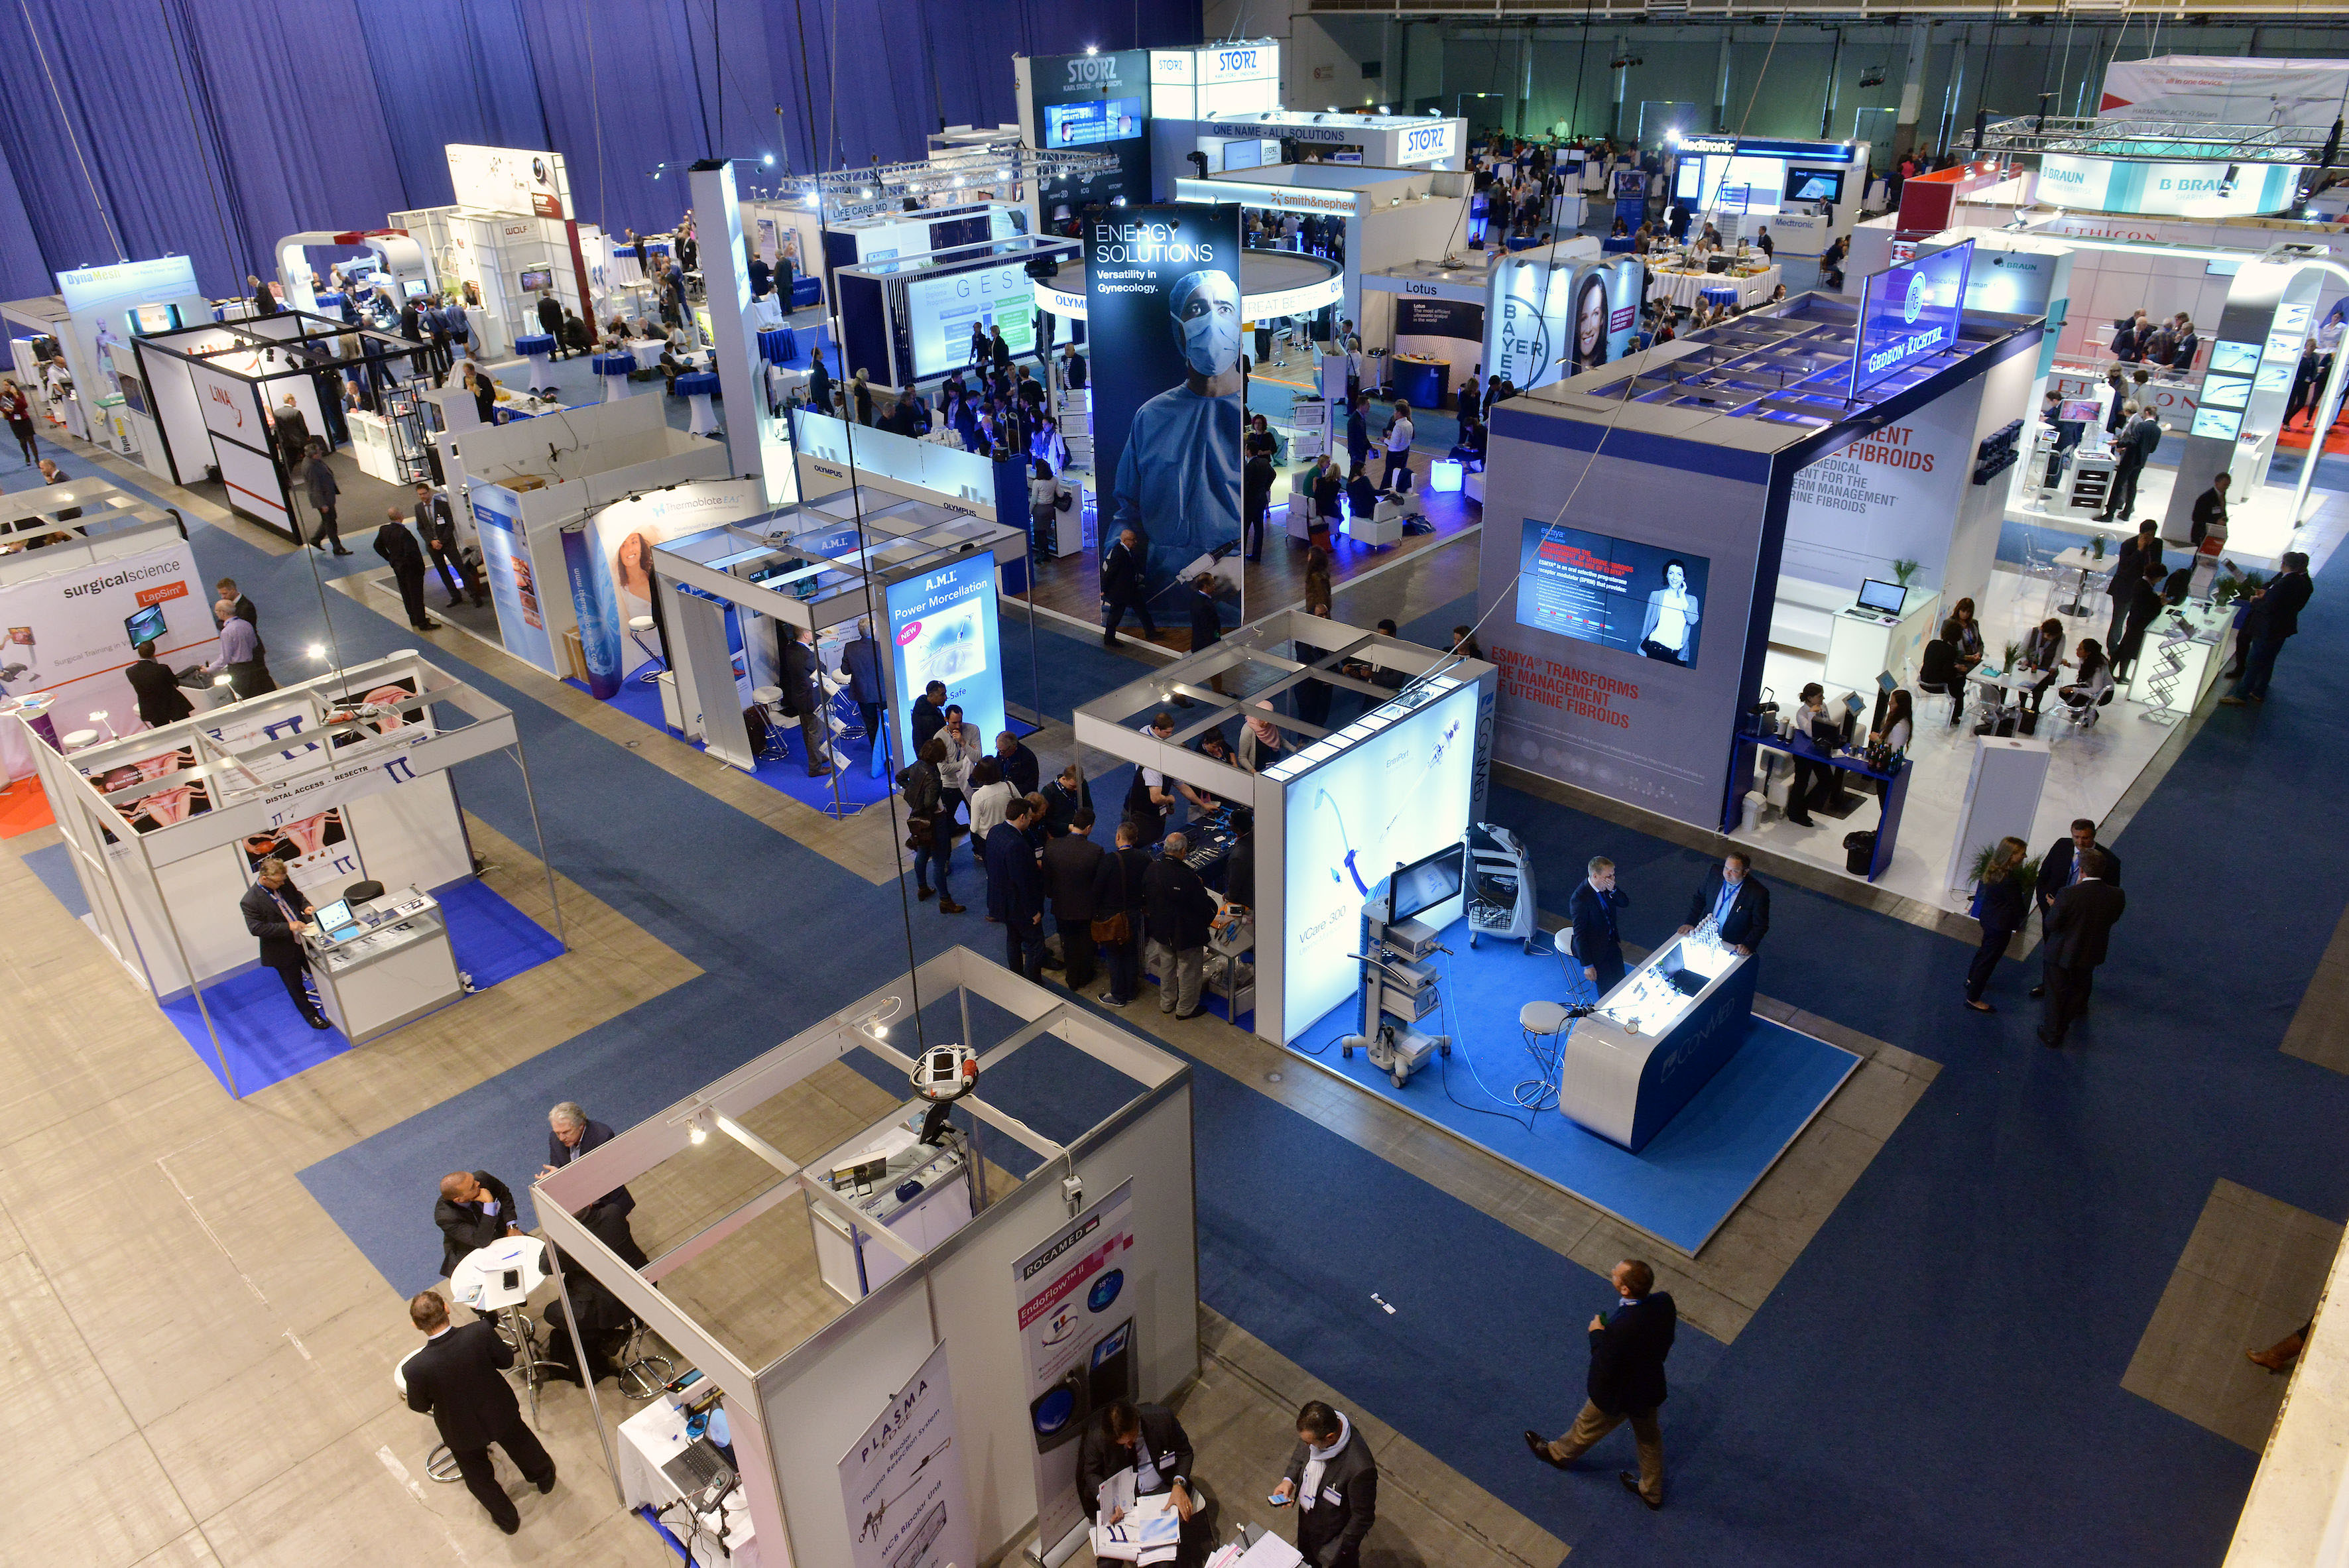 Budapest industry stands / ESGE congress 2015